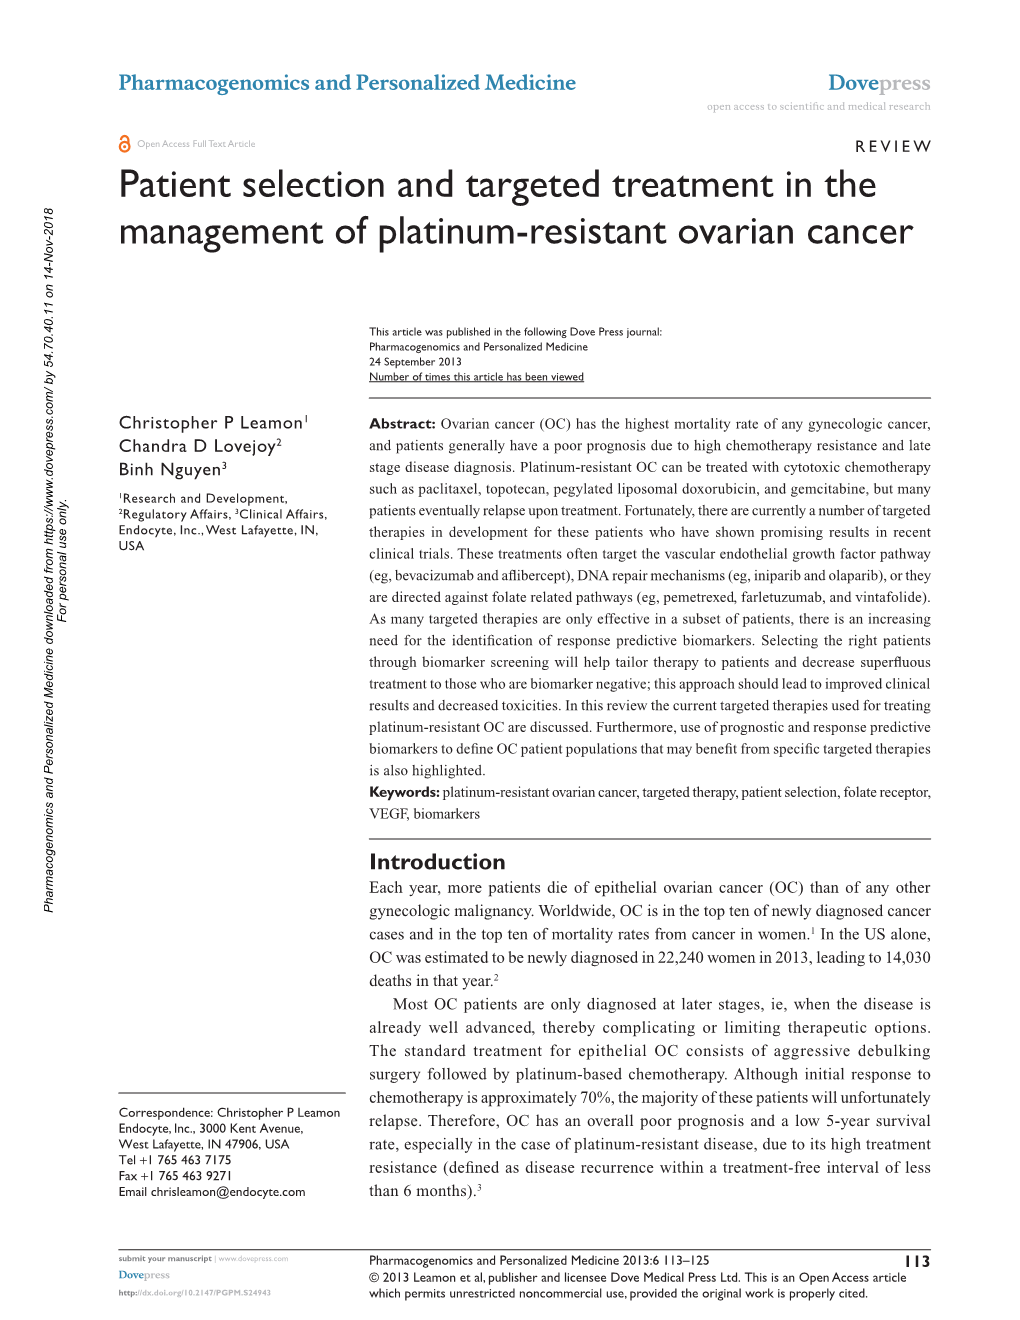 Patient Selection and Targeted Treatment in the Management of Platinum-Resistant Ovarian Cancer